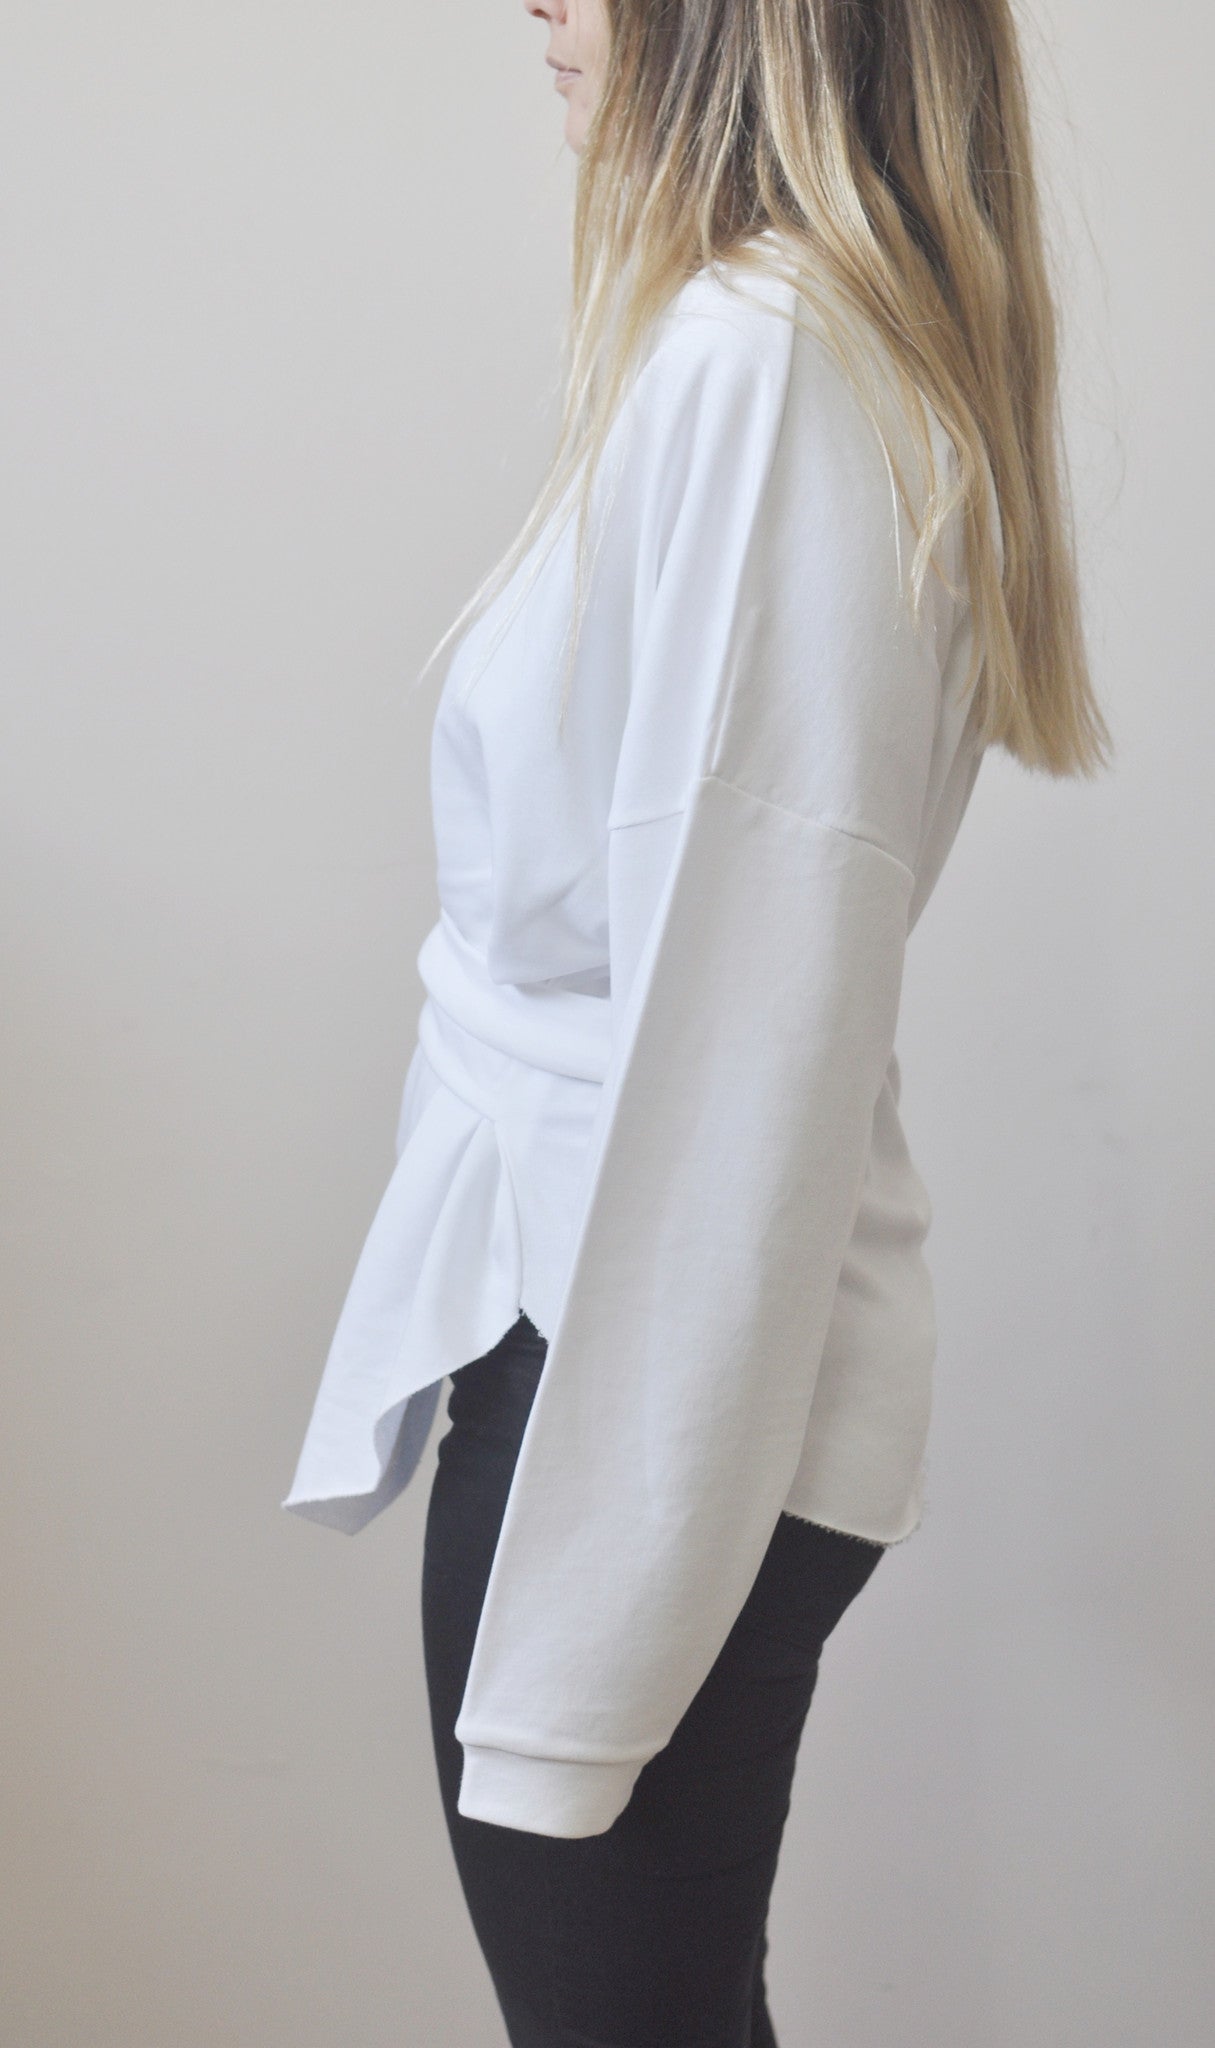 Asymmetric Knot Tie Around Waist Wrap Raw Oval Hem Sweatshirt in White / Overlong Sleeve Cut-out Accent